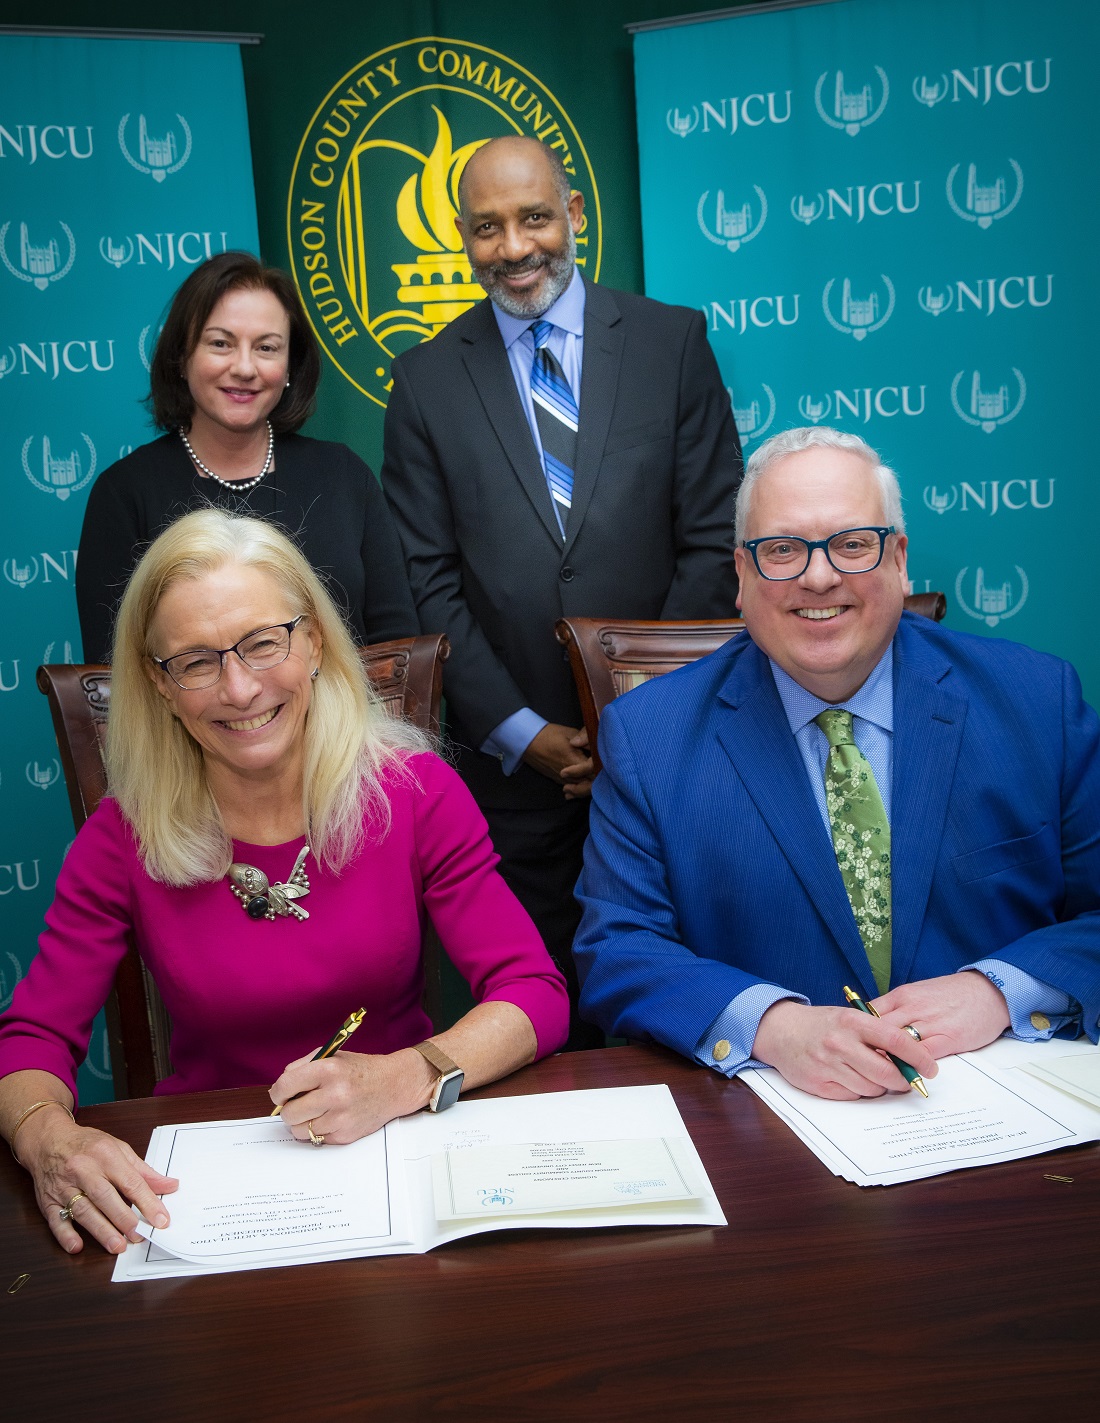 Seated: New Jersey City University President, Dr. Sue Henderson, and Hudson County Community College President, Dr. Chris Reber. Standing: Dr. Tamara Jhashi, NJCU Senior Vice President and Provost, and Dr. Darryl Jones, HCCC Vice President for Academic Affairs.